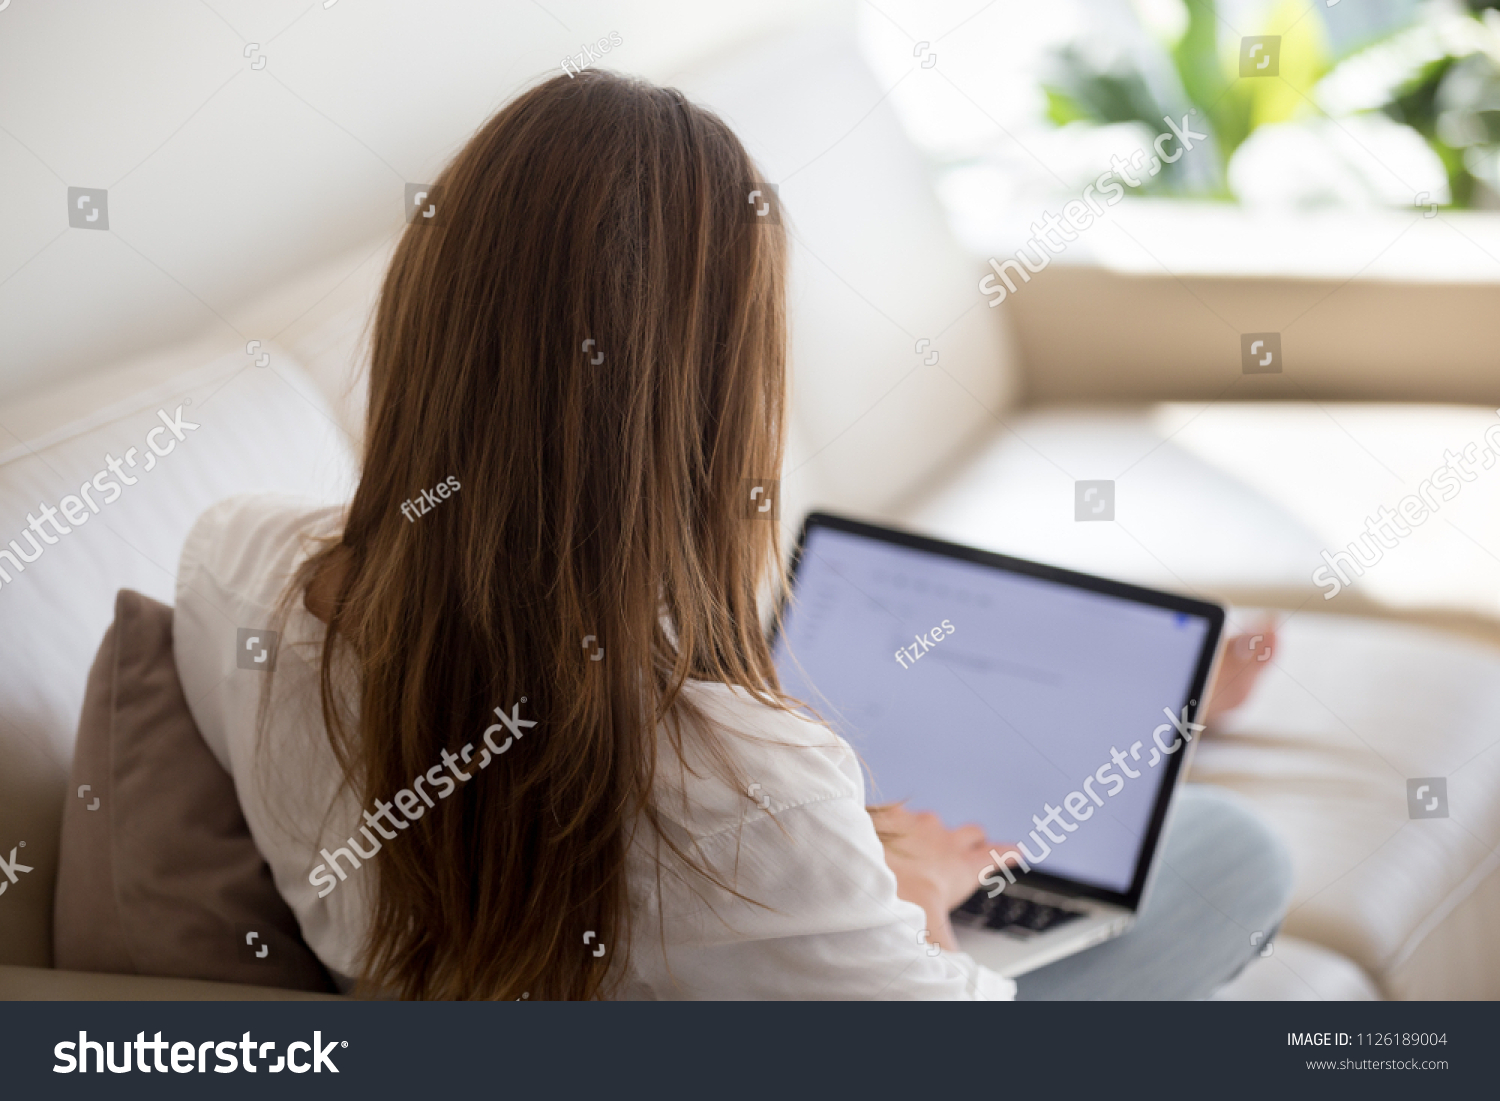 Woman using laptop for typing email at home, female blogger writer writing text for blog post, unemployed lady searching for work opportunities creating cover letter applying for new job, rear view #1126189004